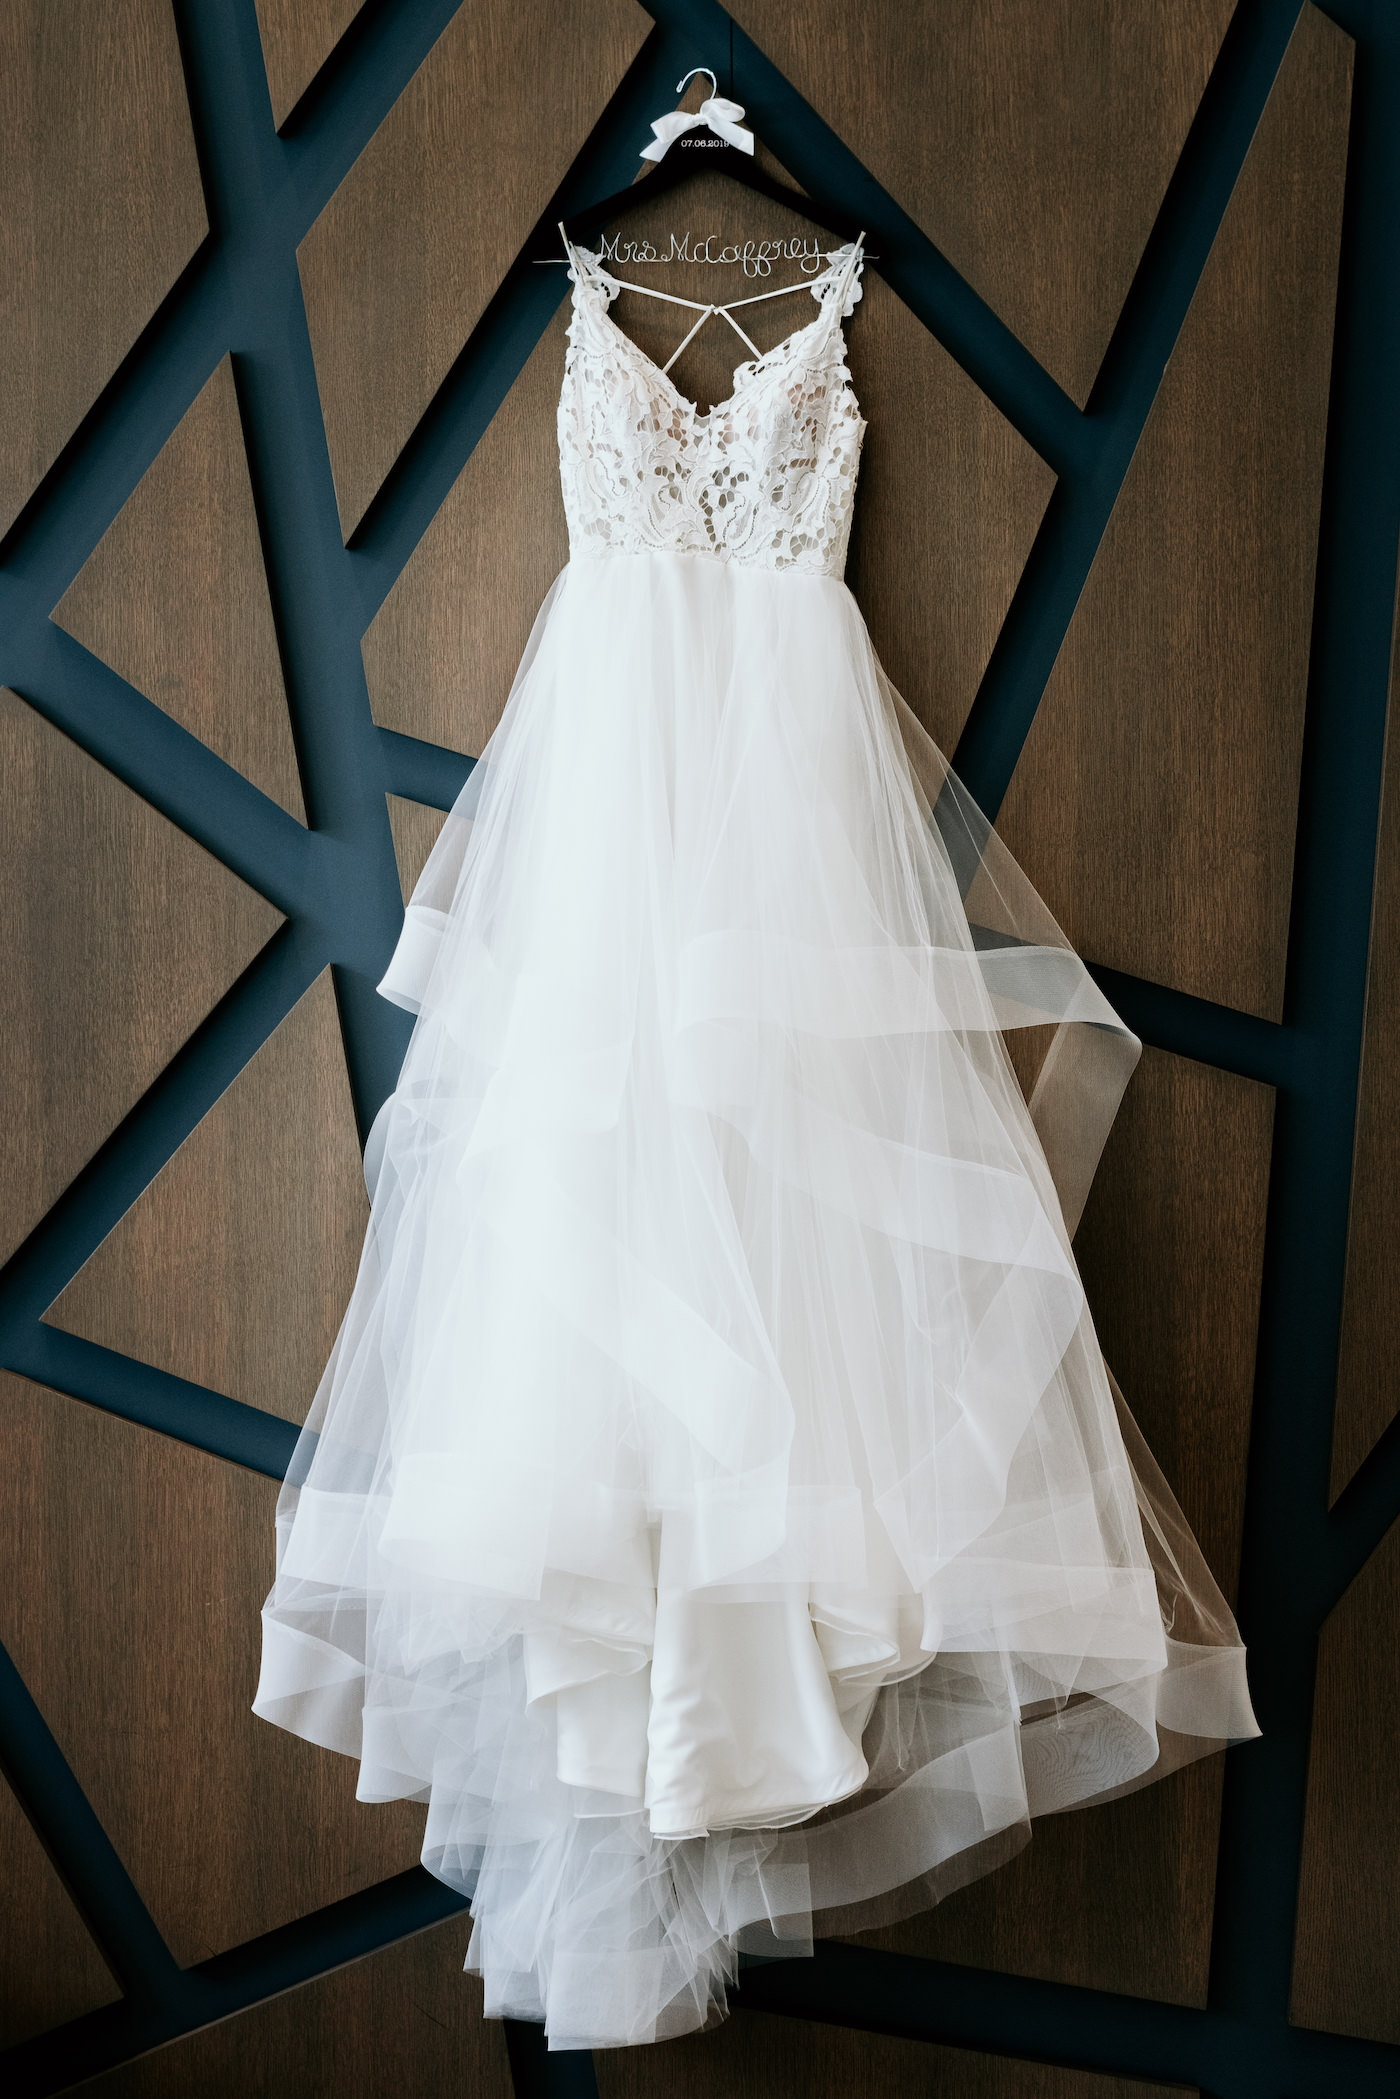 Romantic, Modern White A Line Lace Bodice and Tulle Skirt Wedding Dress Hanging on Art Deco Wall at Hyatt Place Hotel St. Petersburg Downtown | Florida Wedding Photographer Bonnie Newman Creative